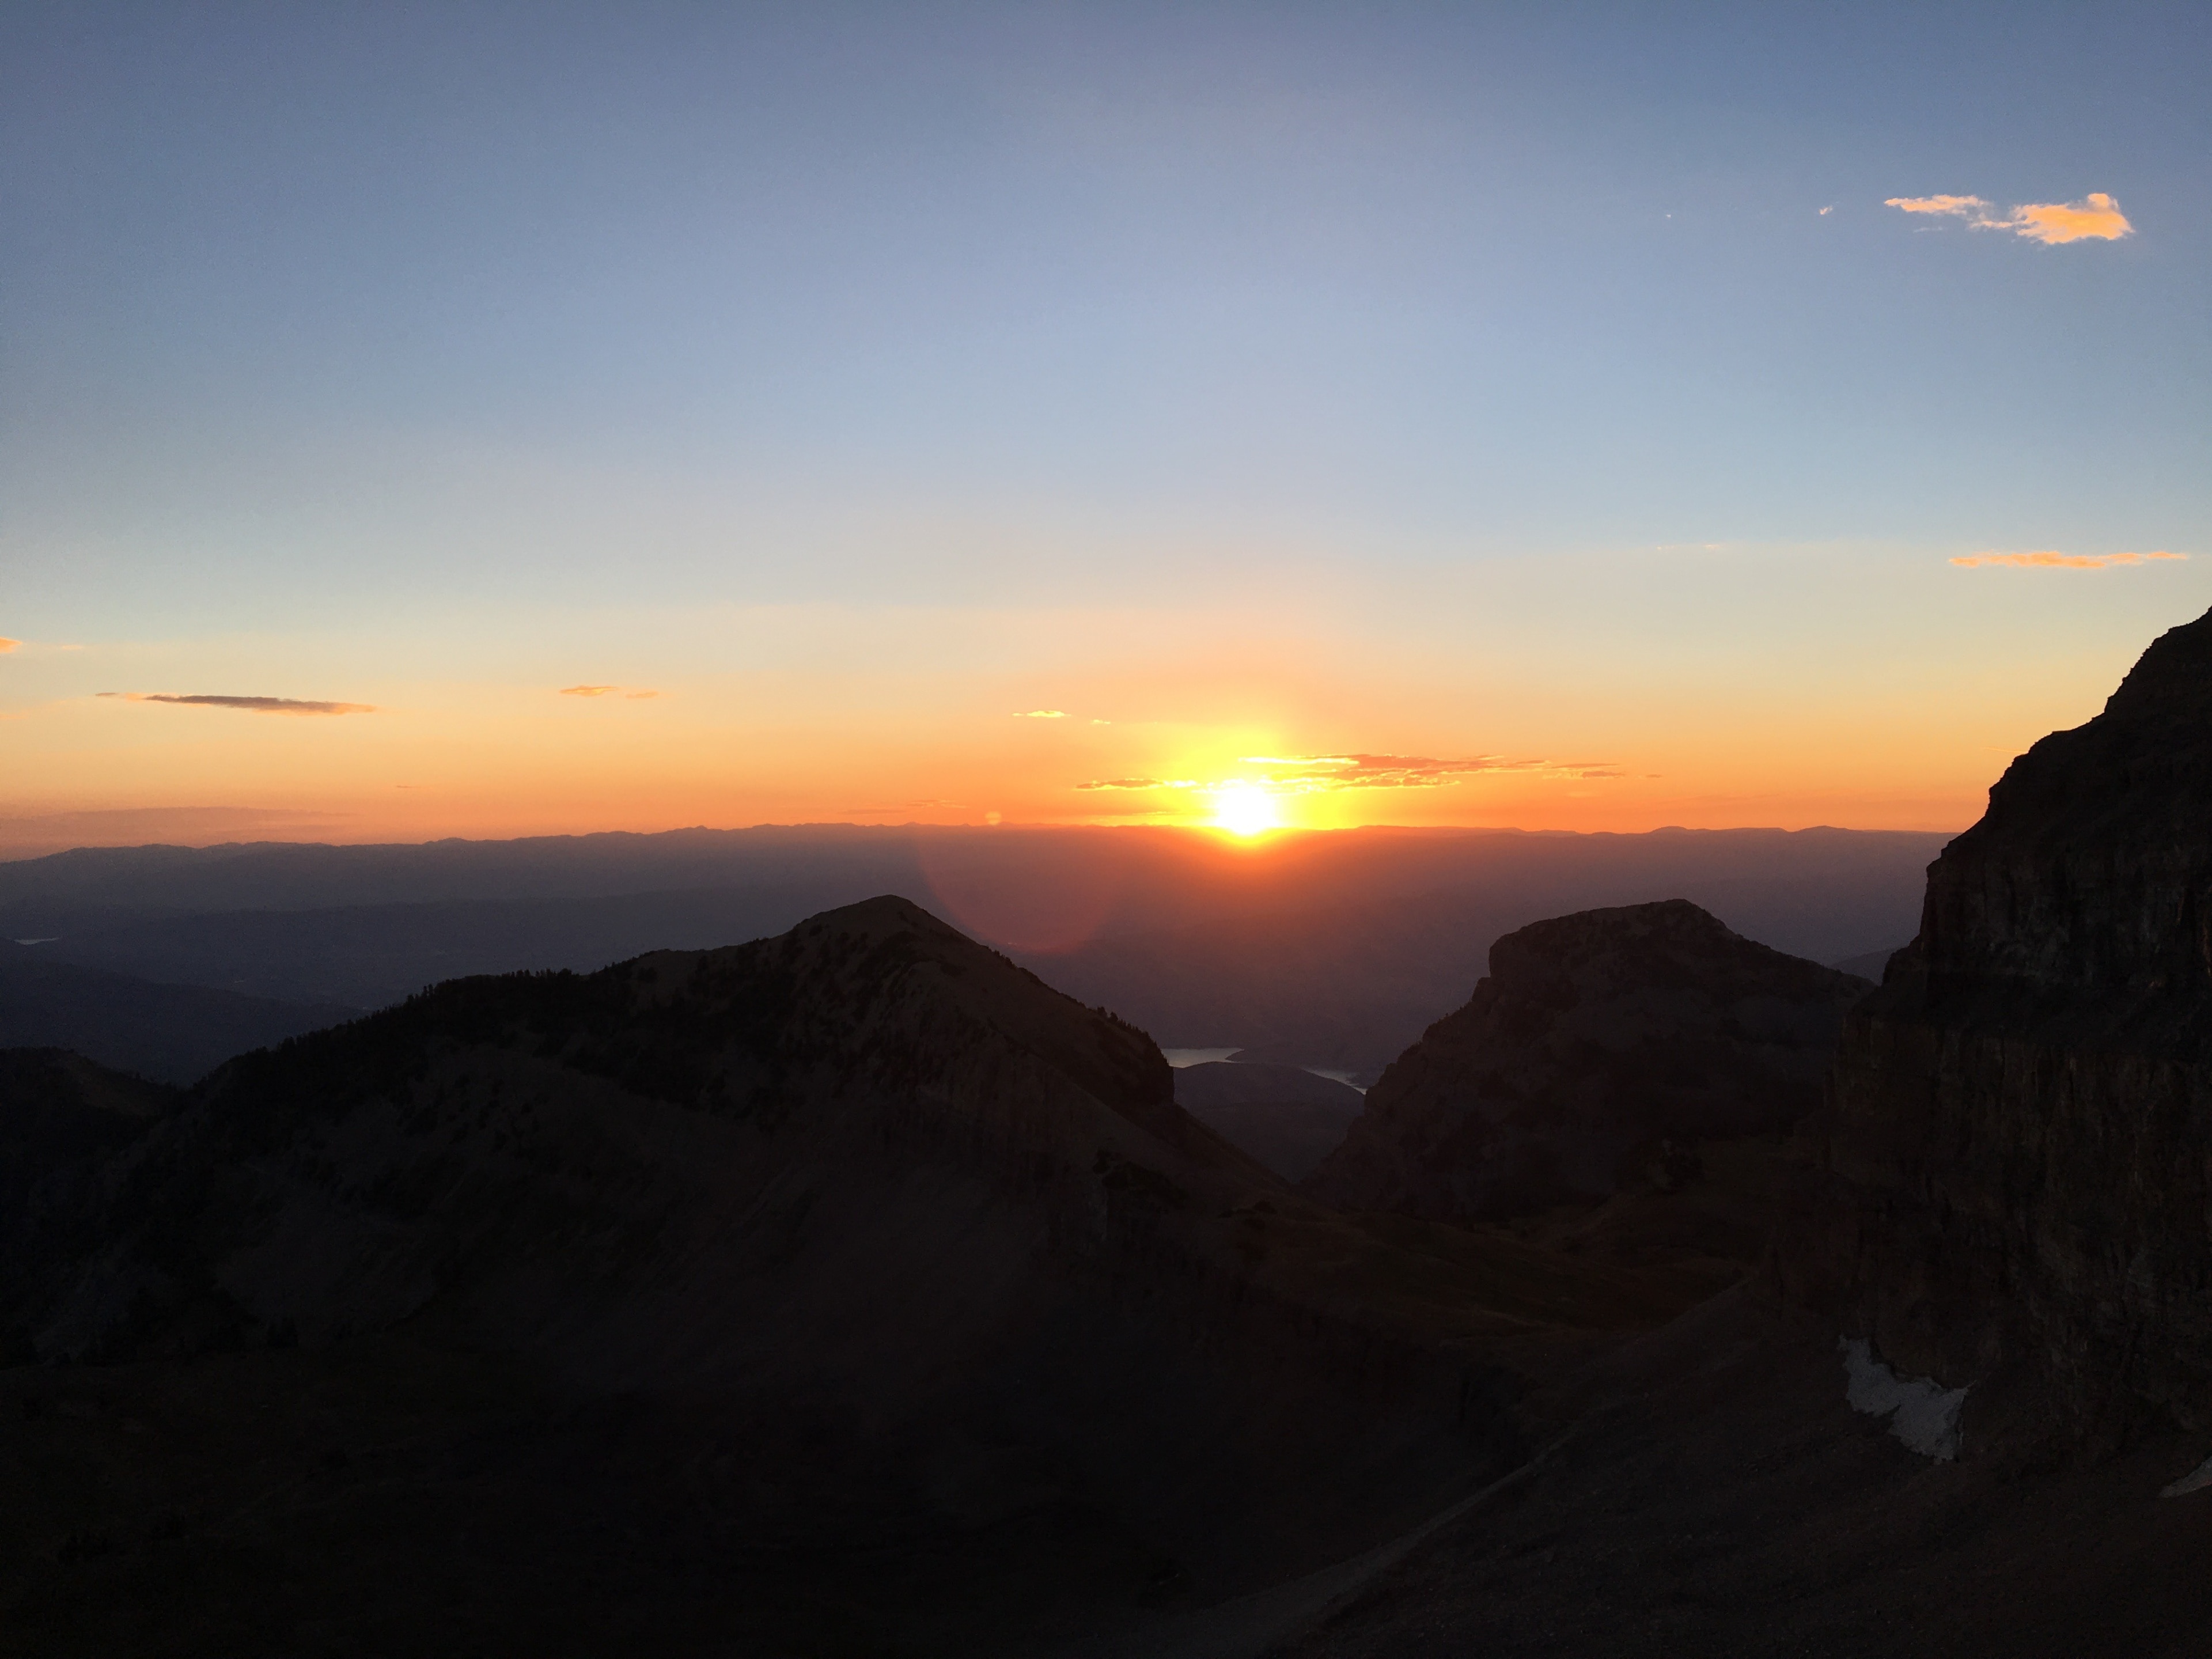 The sunrise from the summit of Mount Timpanogos.  It was a long and cold 7 miles to the top but definitely worth it! #Adventure